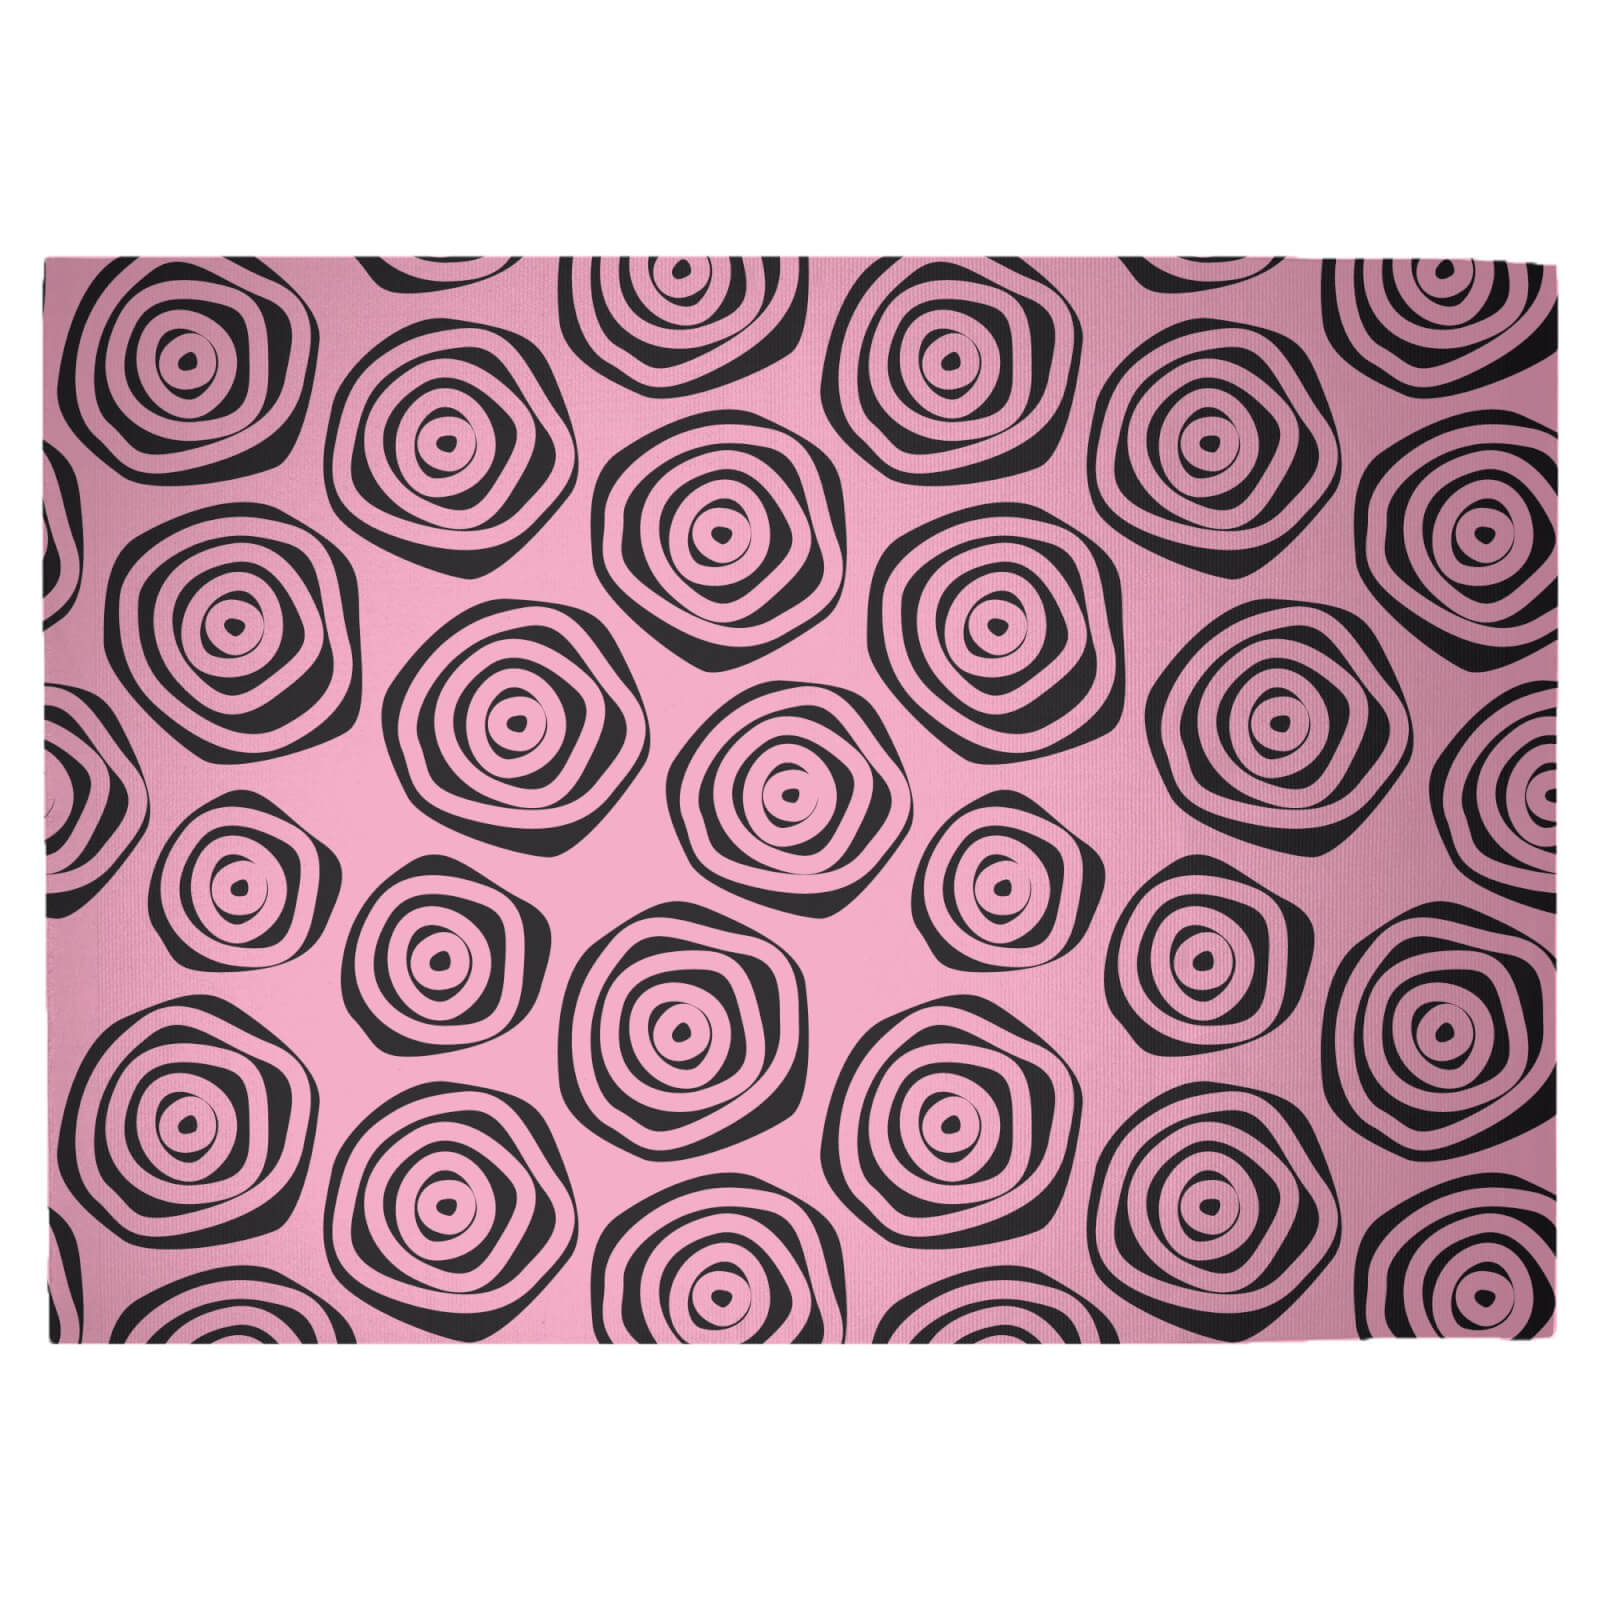 Abstract Roses Woven Rug - Large